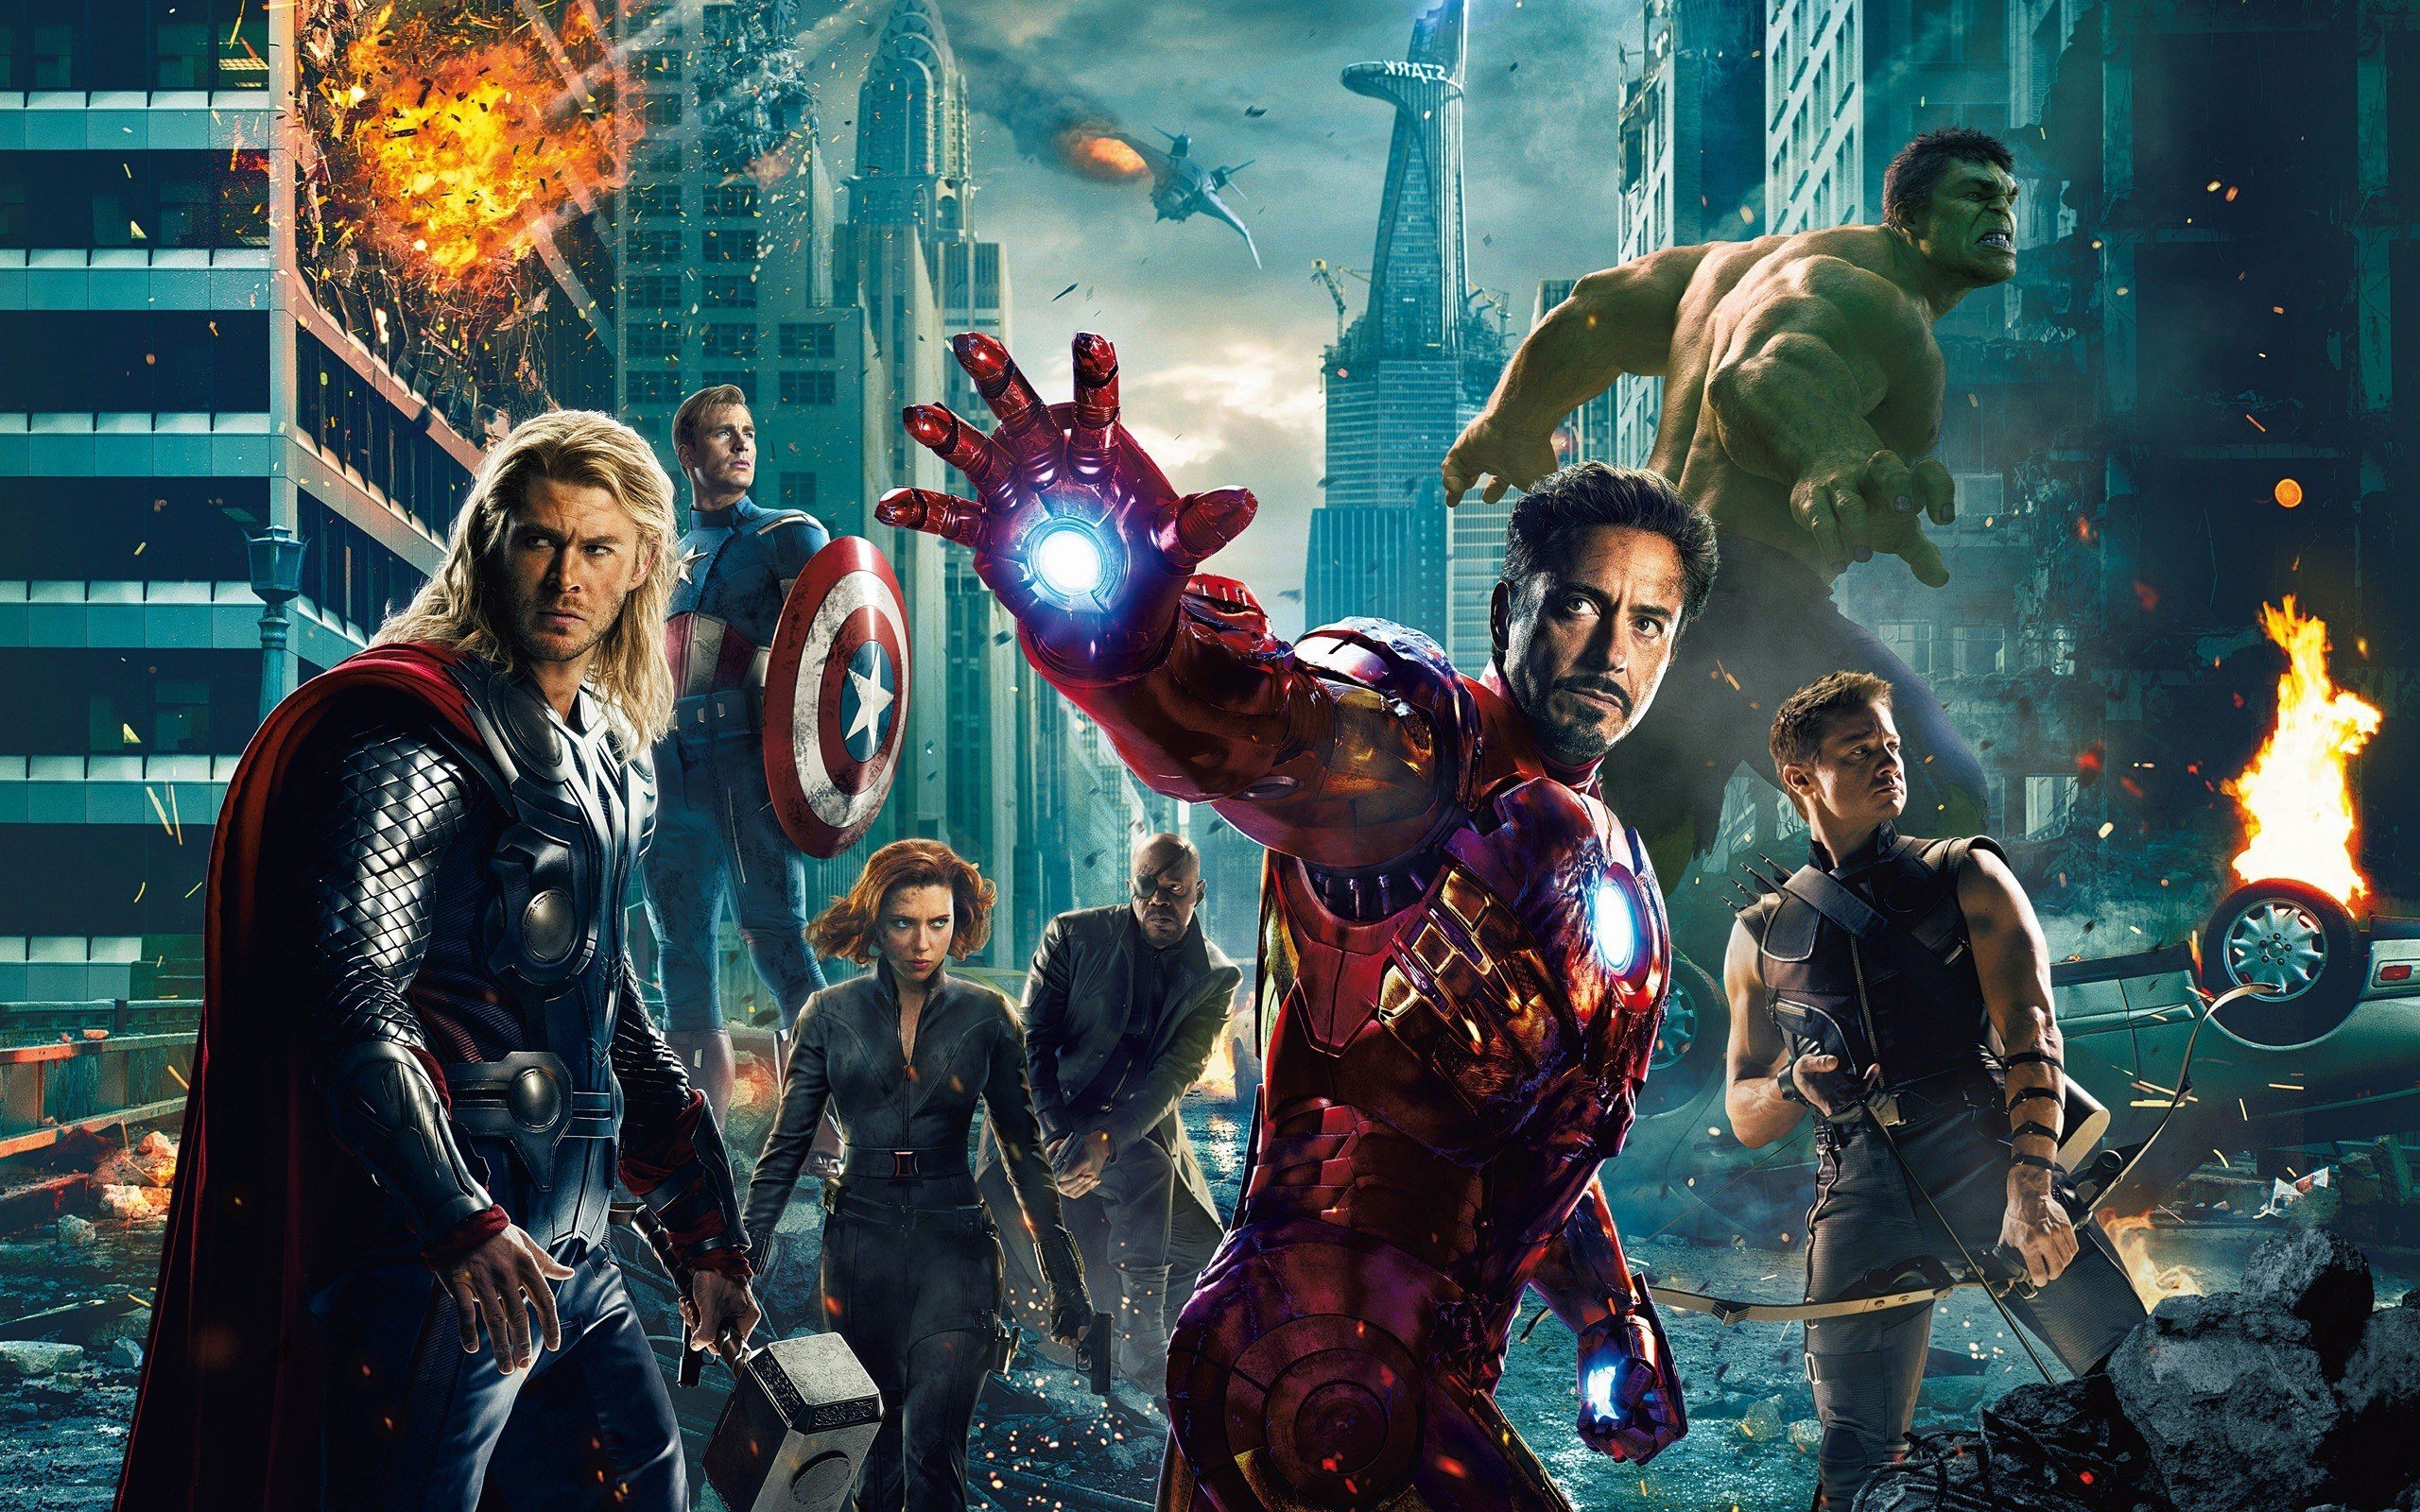 8 Lessons I’ve Learned from the Characters of the Avengers